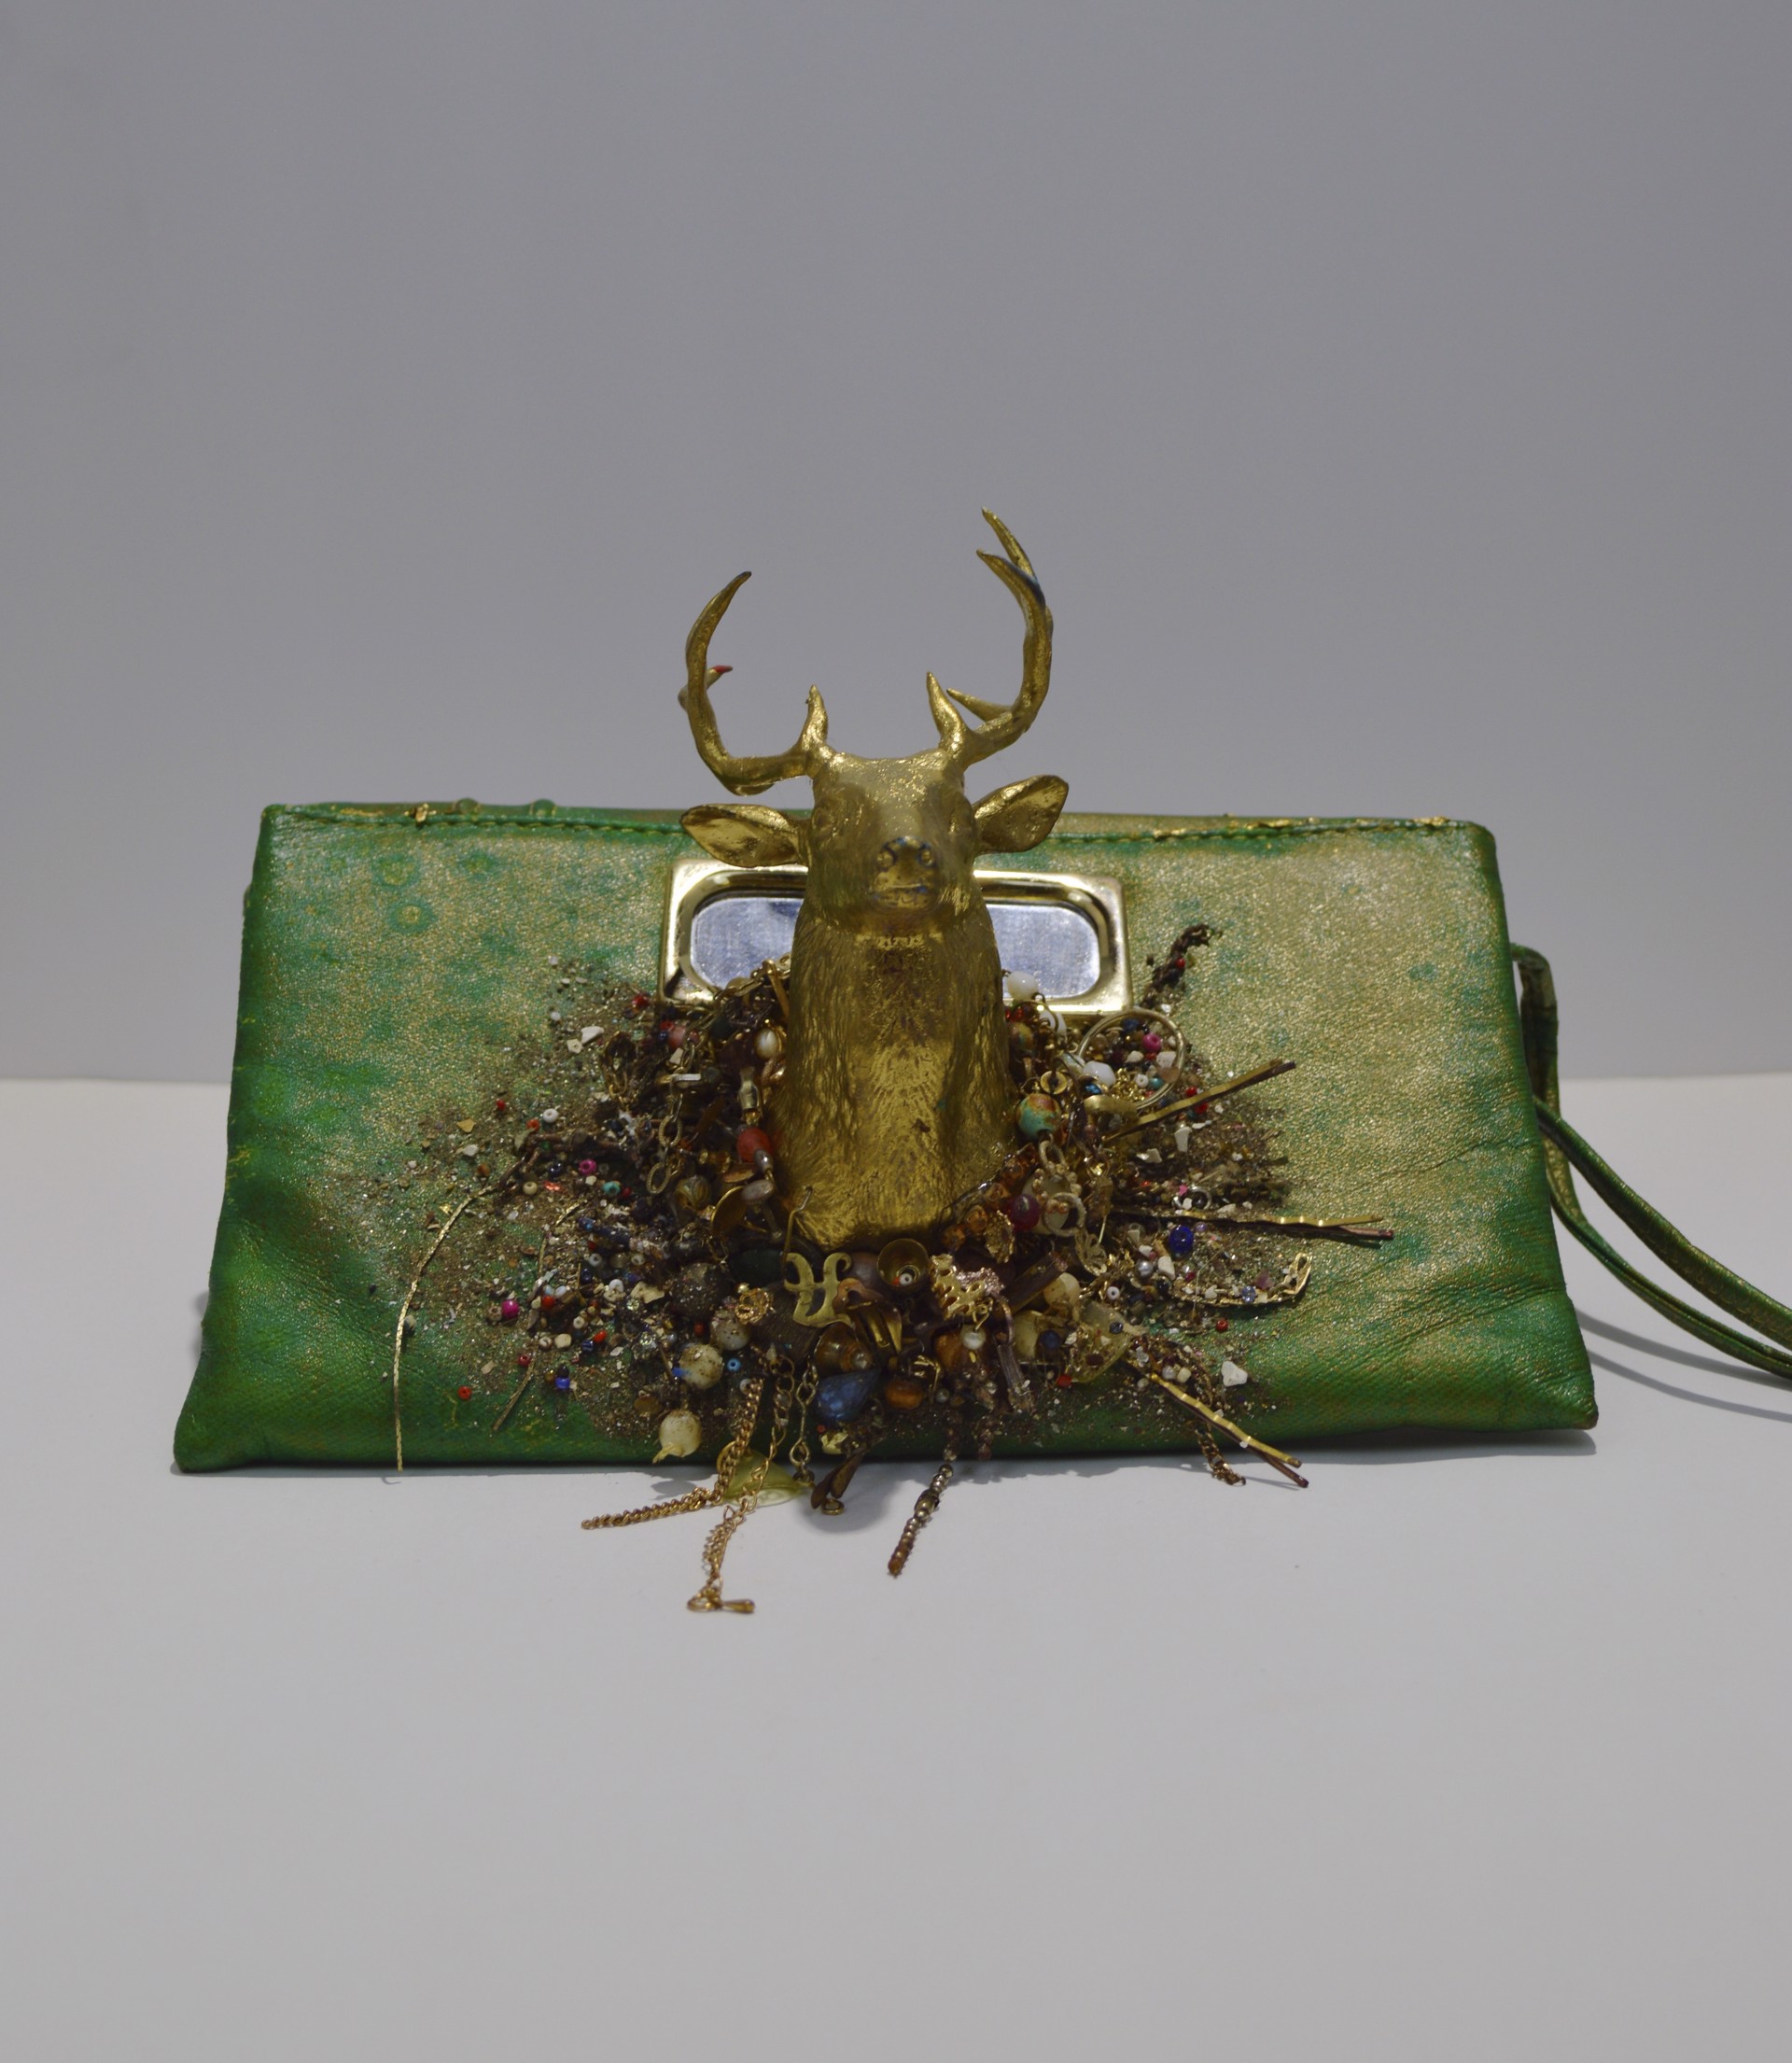 Stag Bag by Monica Cioppettini